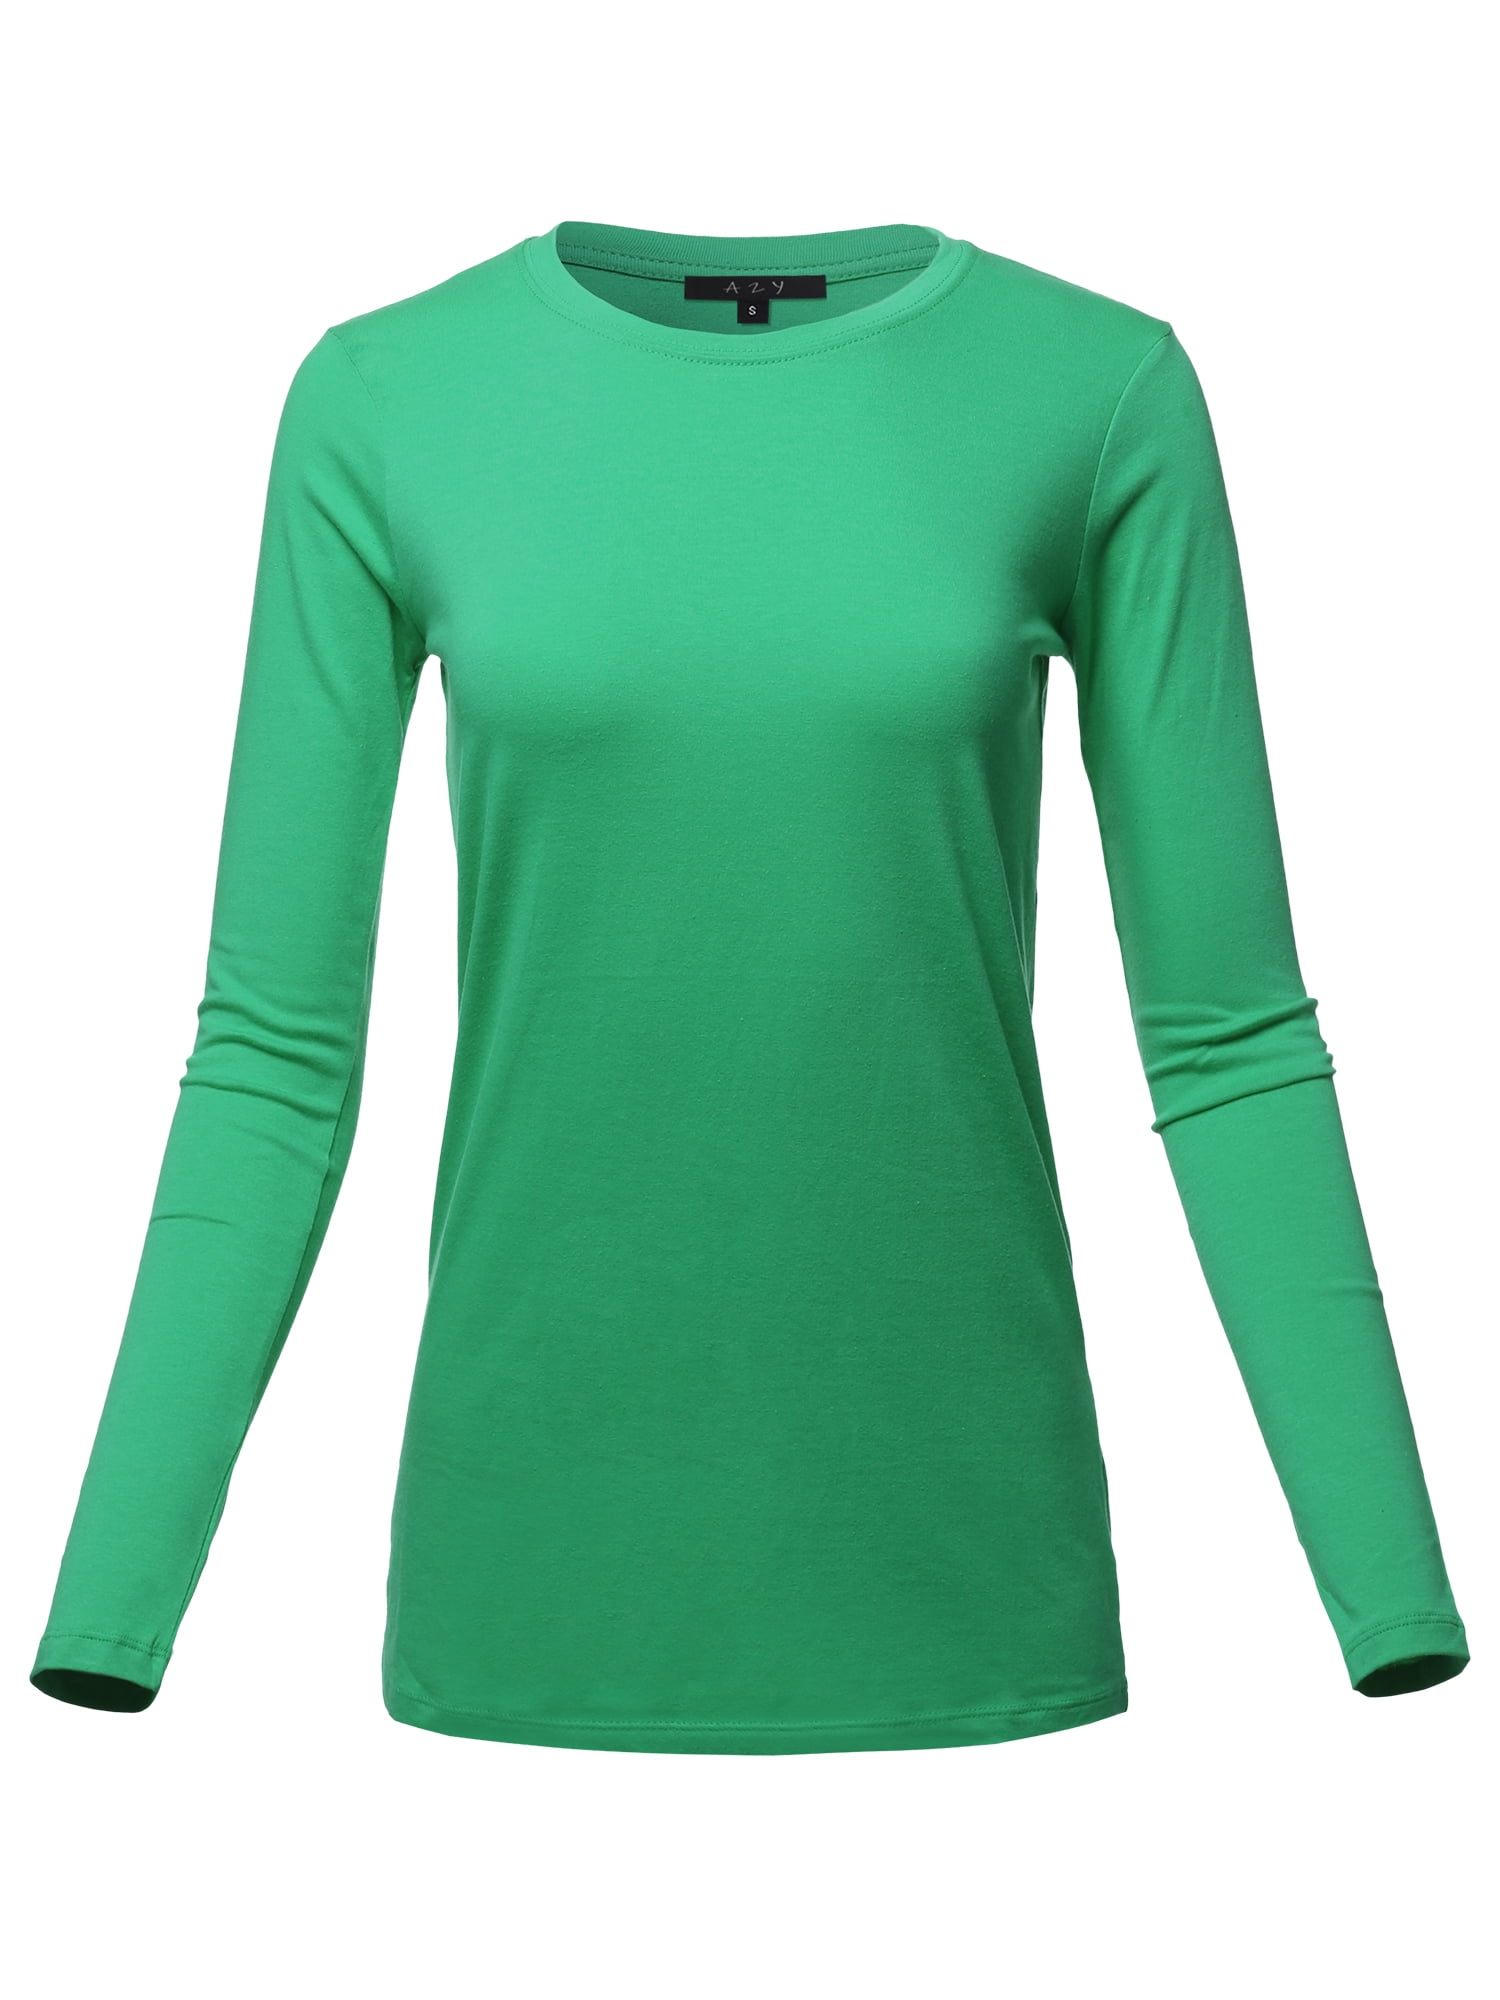 A2Y Women's Basic Solid Soft Cotton Long Sleeve Crew Neck Top Shirts Kelly  Green S